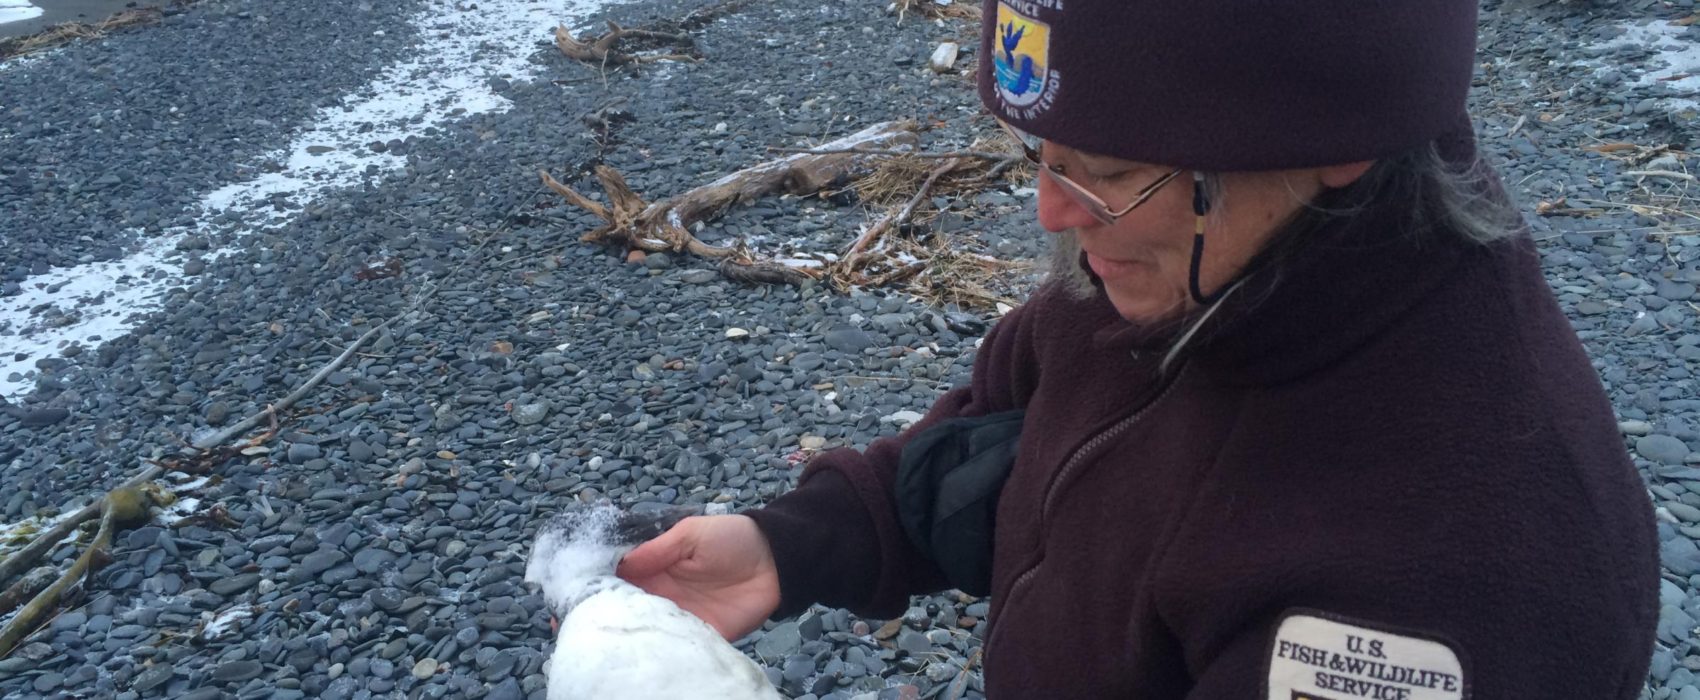 Wildlife Biologist Leslie Slater holds one of about a dozen dead Common Murres found along a short stretch of beach at the Spit in Homer Tuesday, Dec. 22. (Photo by Daysha Eaton/KBBI)